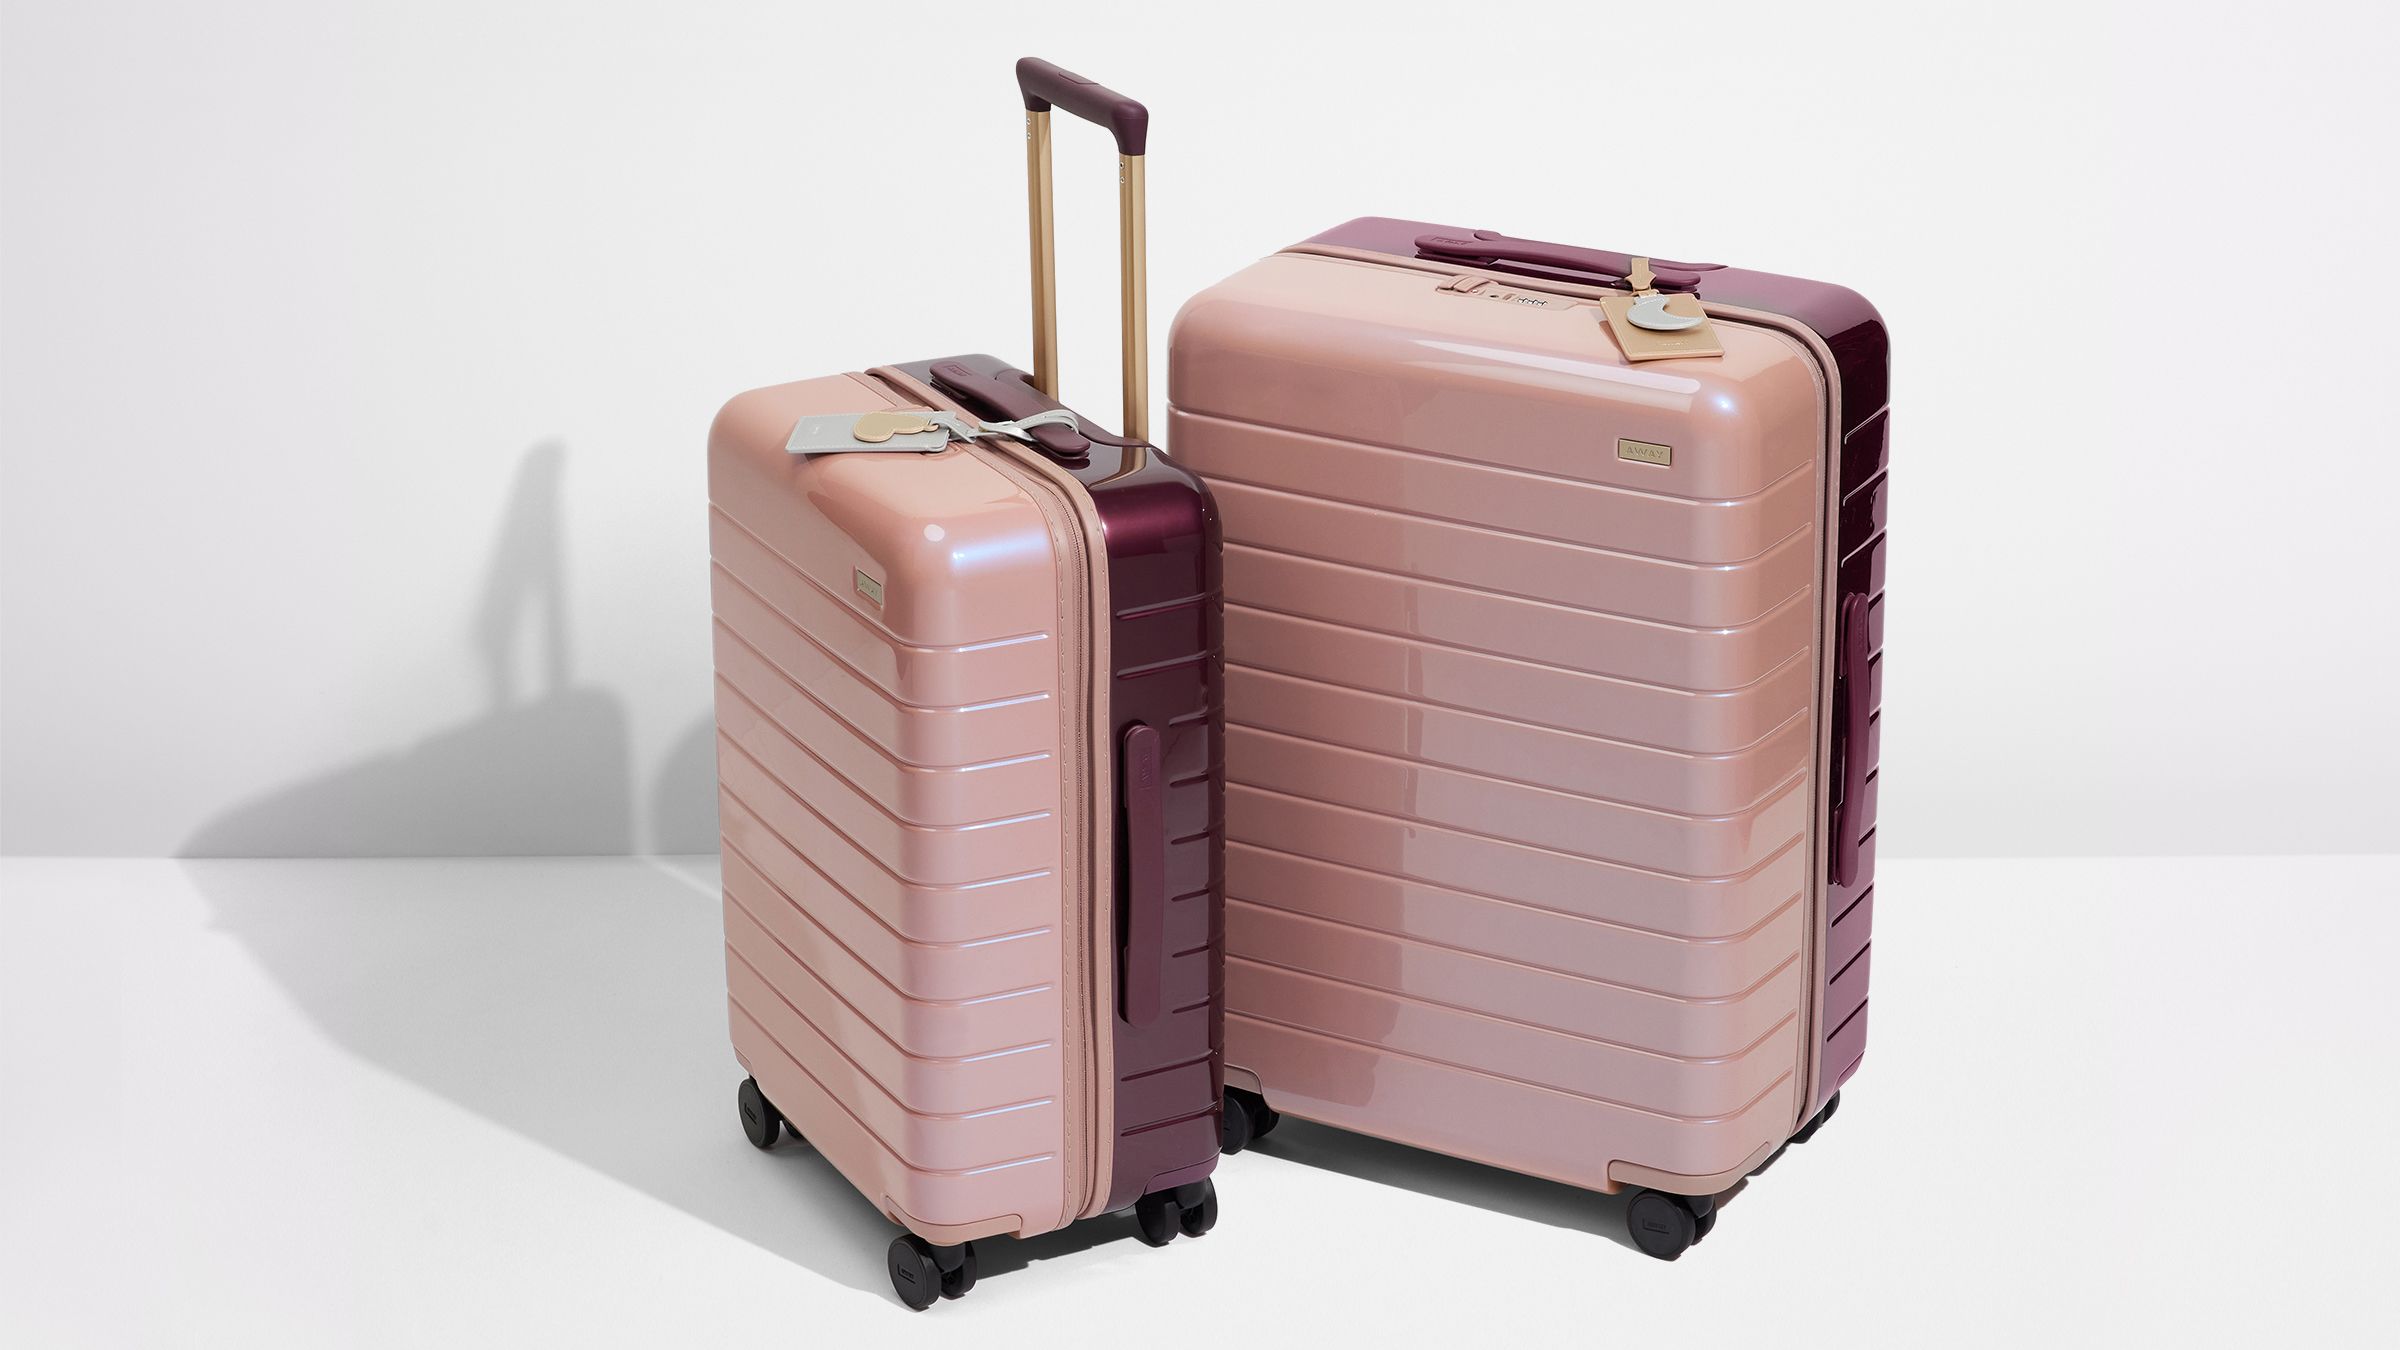 Away launches new Holiday Collection luggage